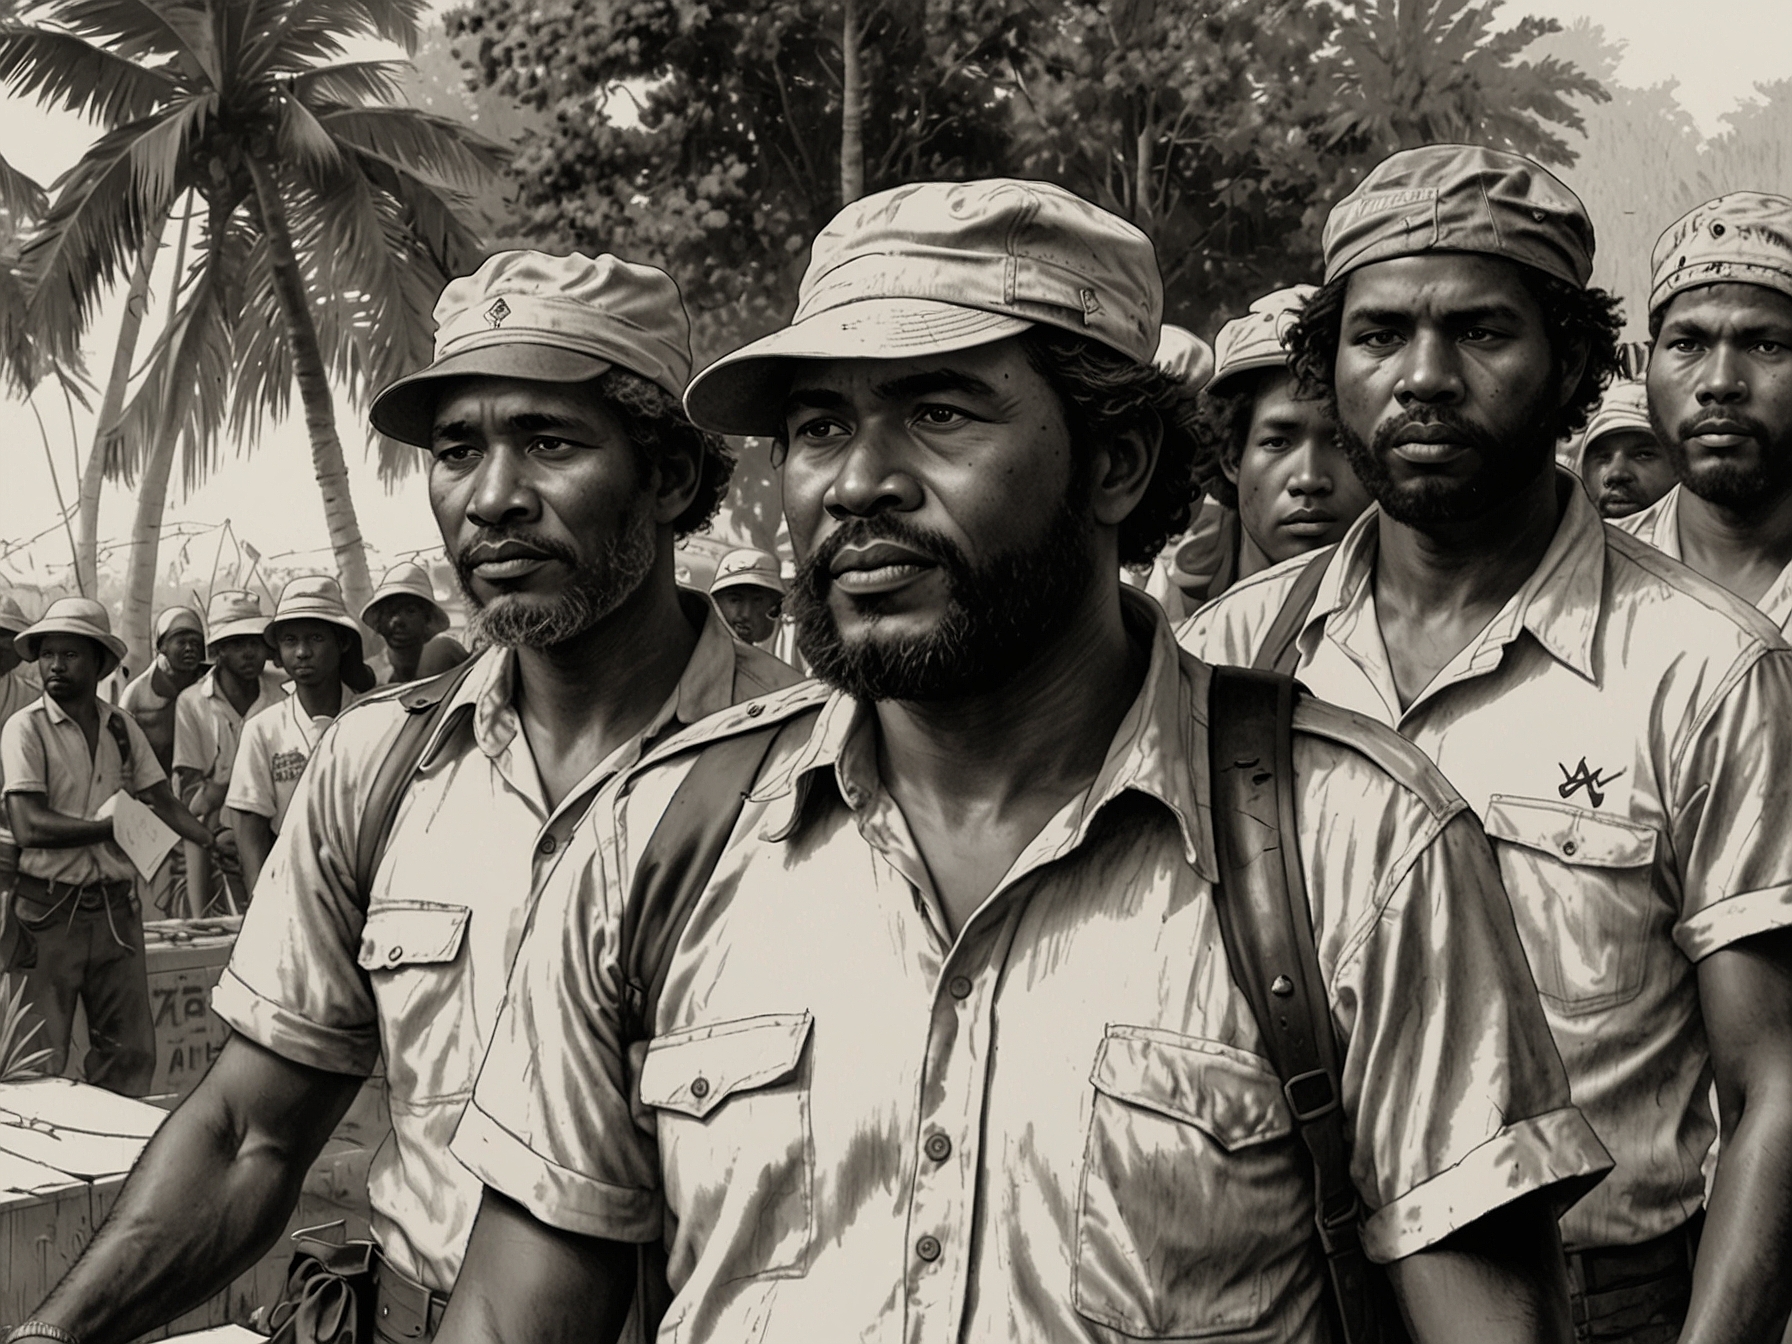 Members of the Kanak and Socialist National Liberation Front (FLNKS) during a public demonstration in New Caledonia.